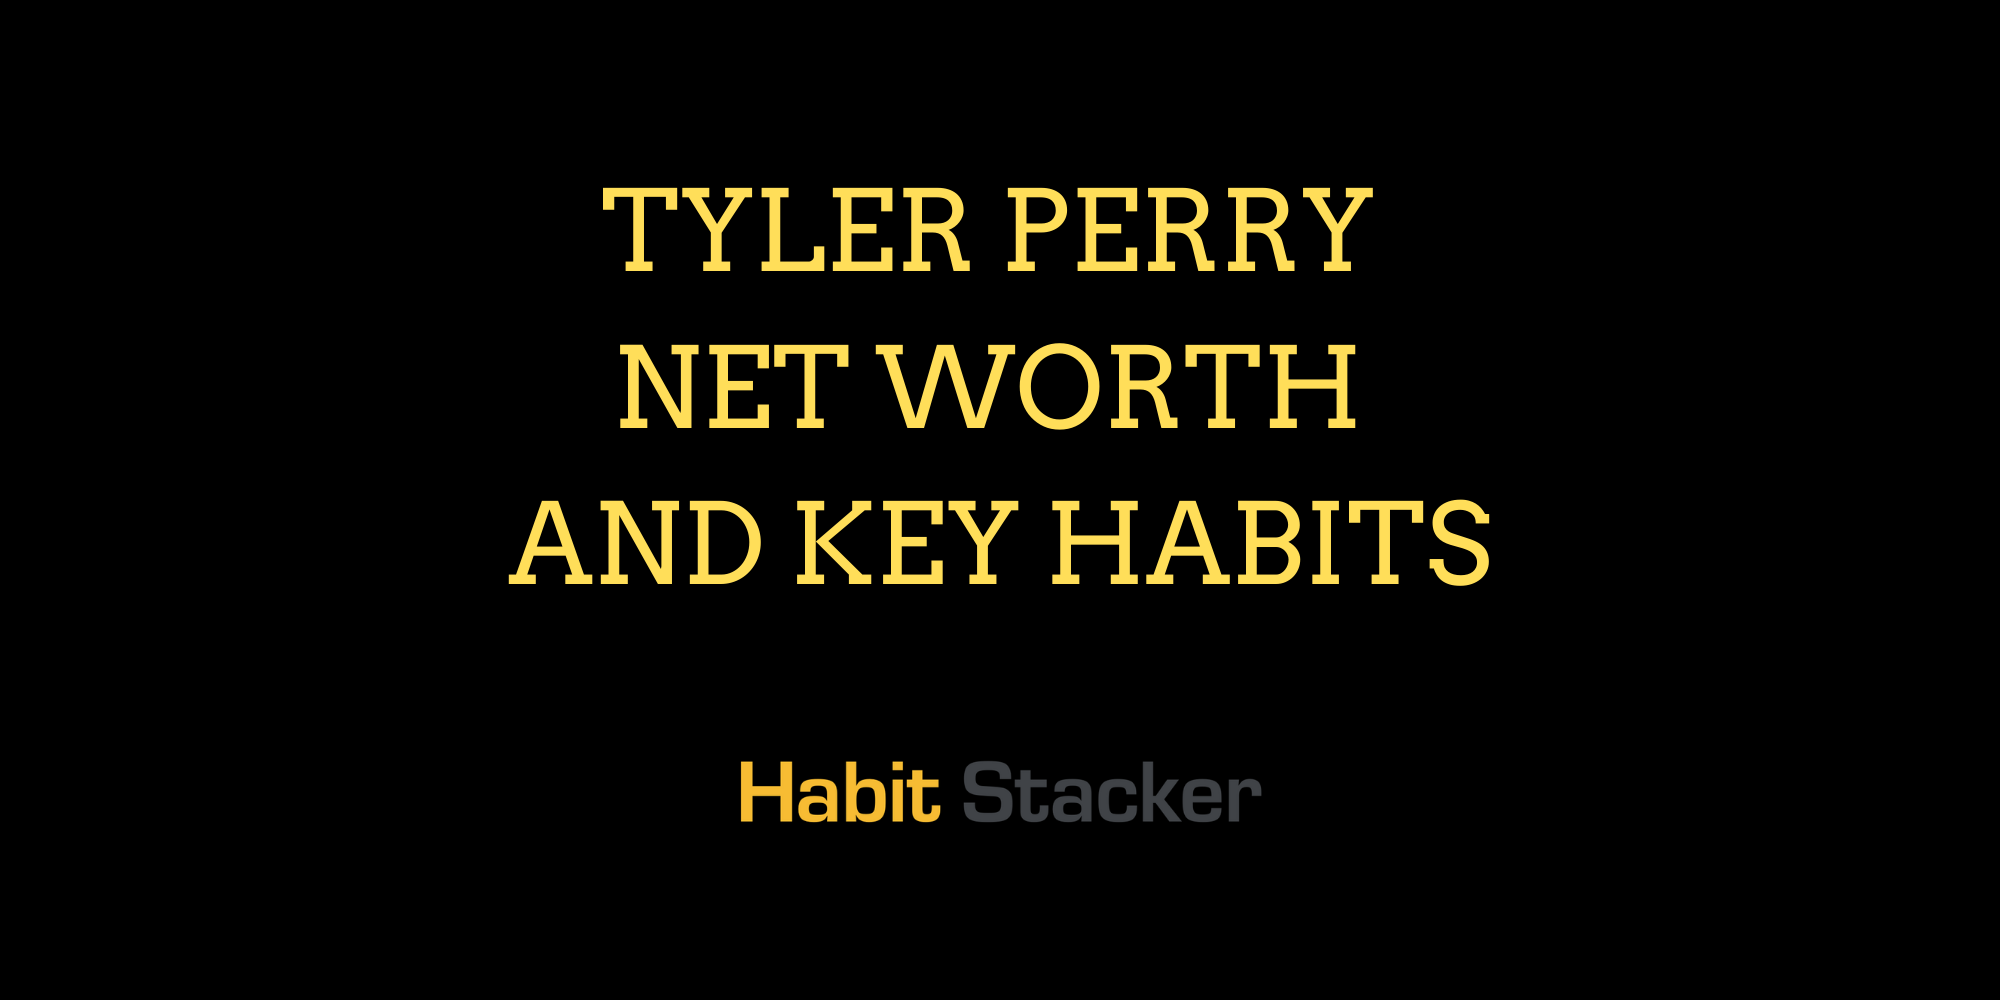 Tyler Perry Net Worth and Key Habits